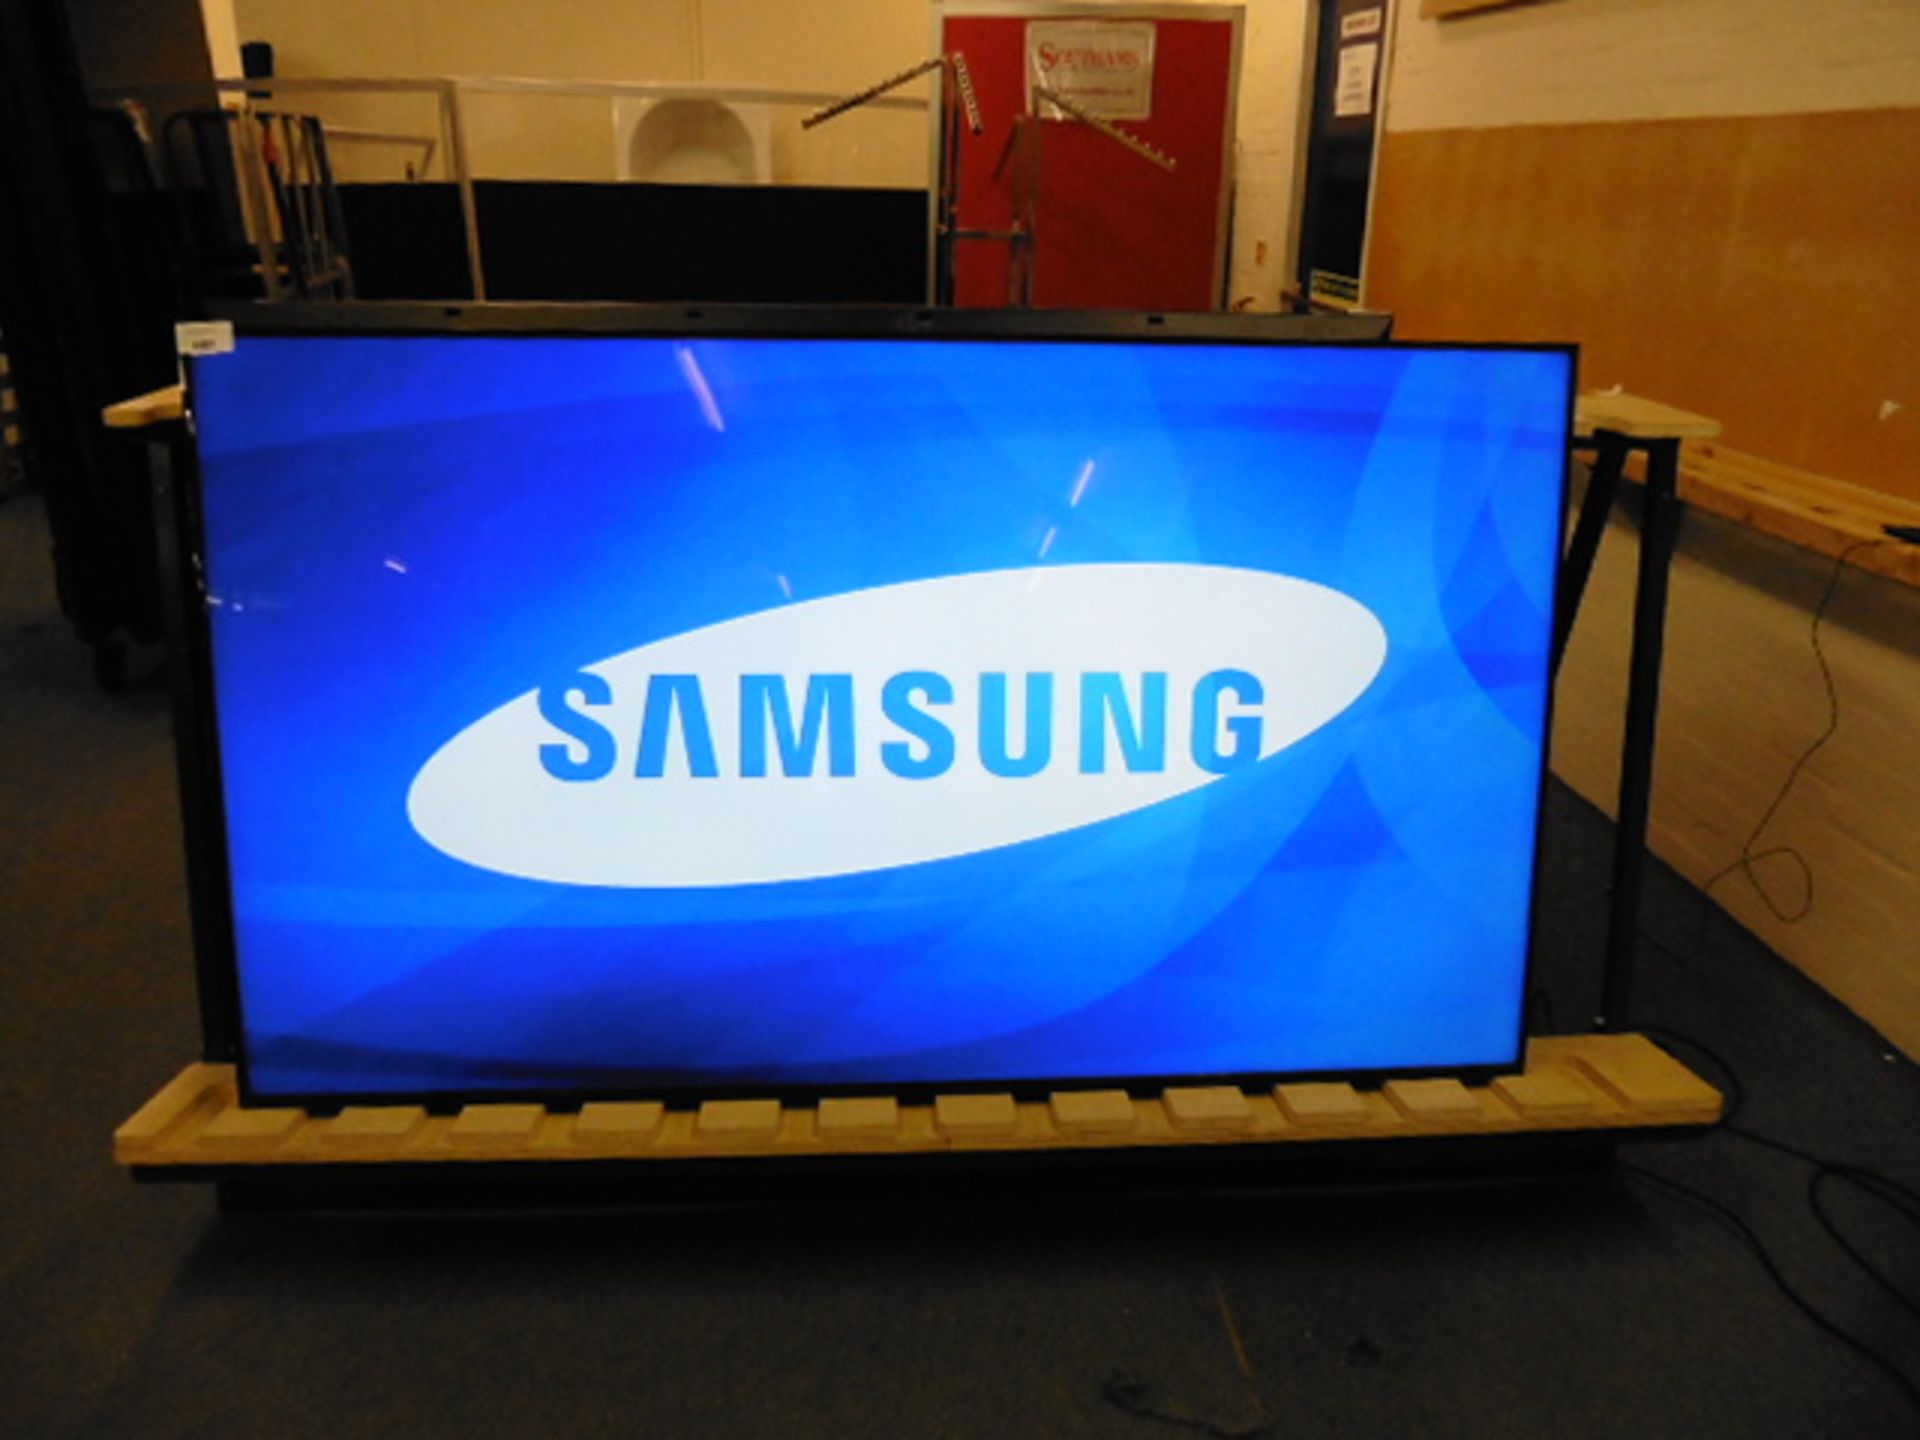 Samsung model LH75DMD 75'' professional display monitor with remote (manufactured 2015)